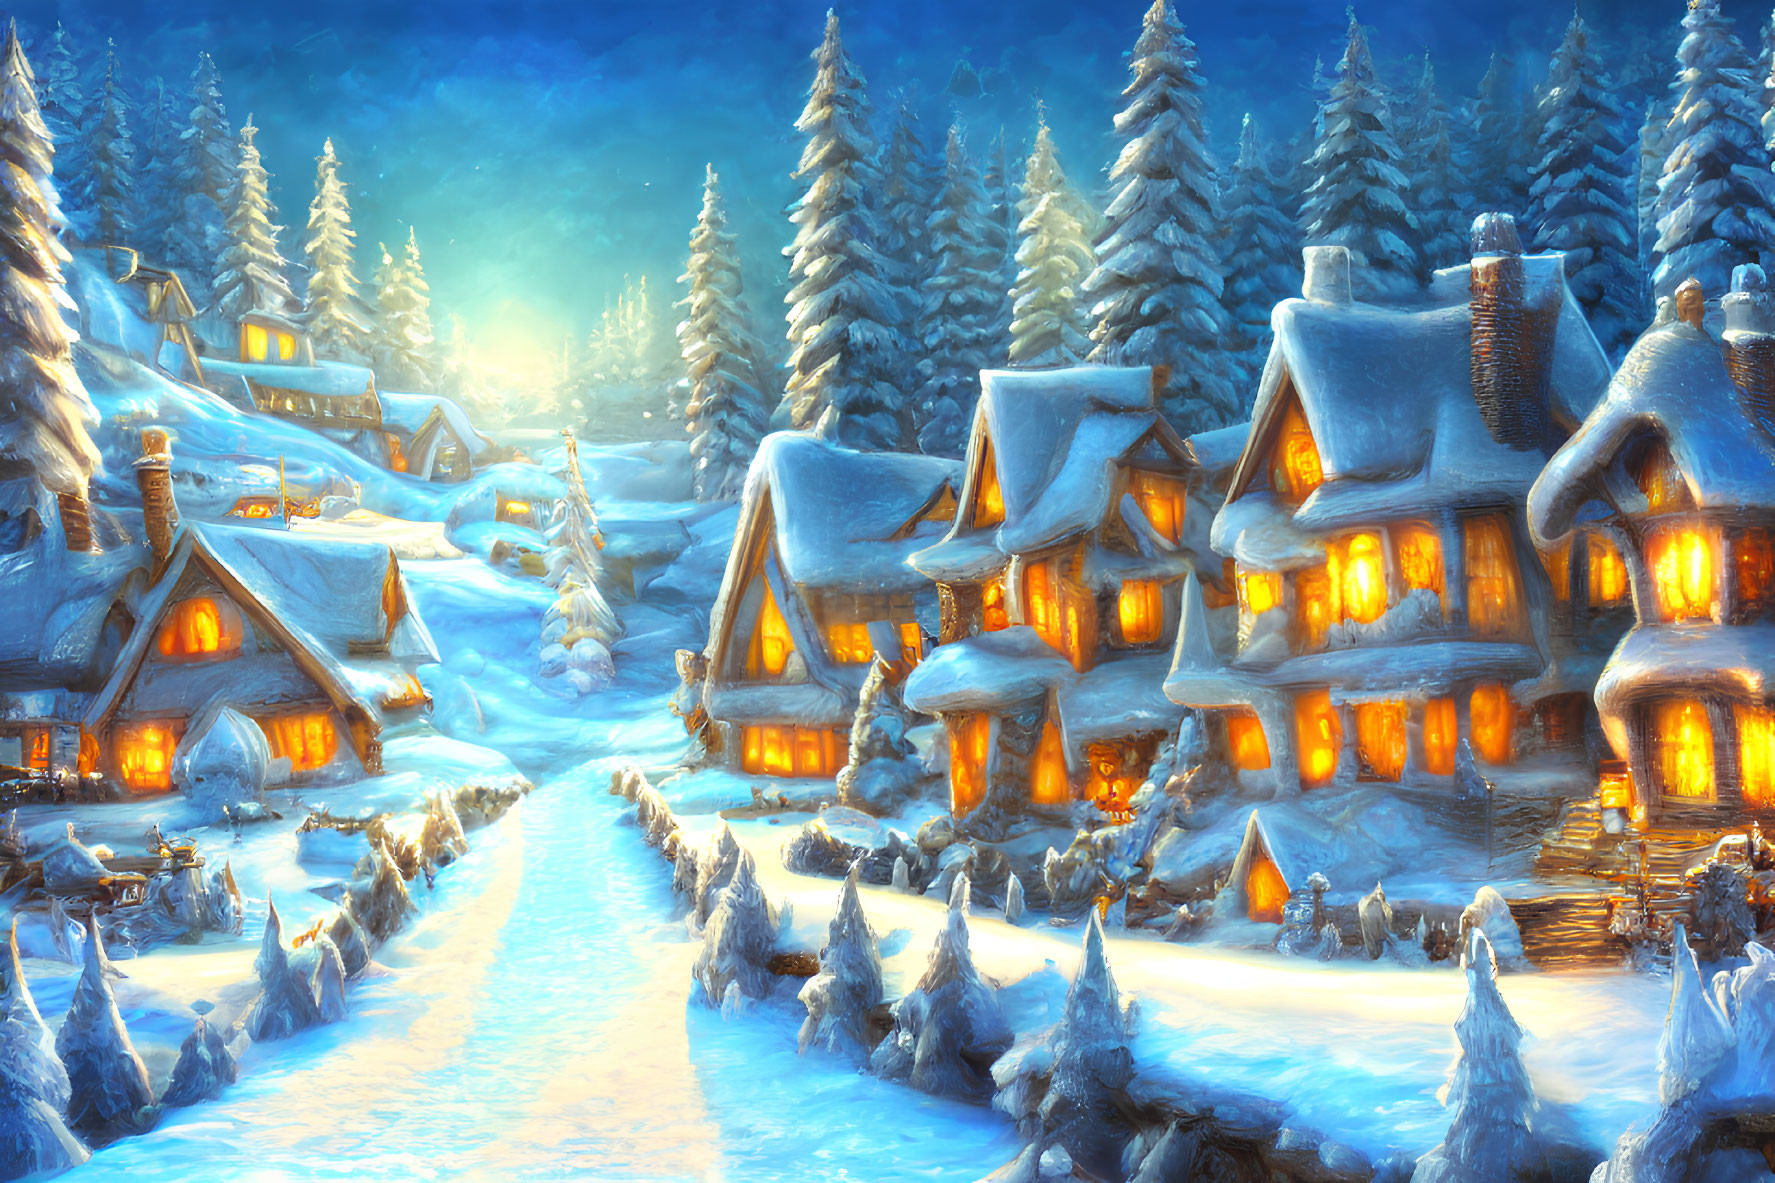 Snow-covered winter village with glowing windows and snowy pine trees